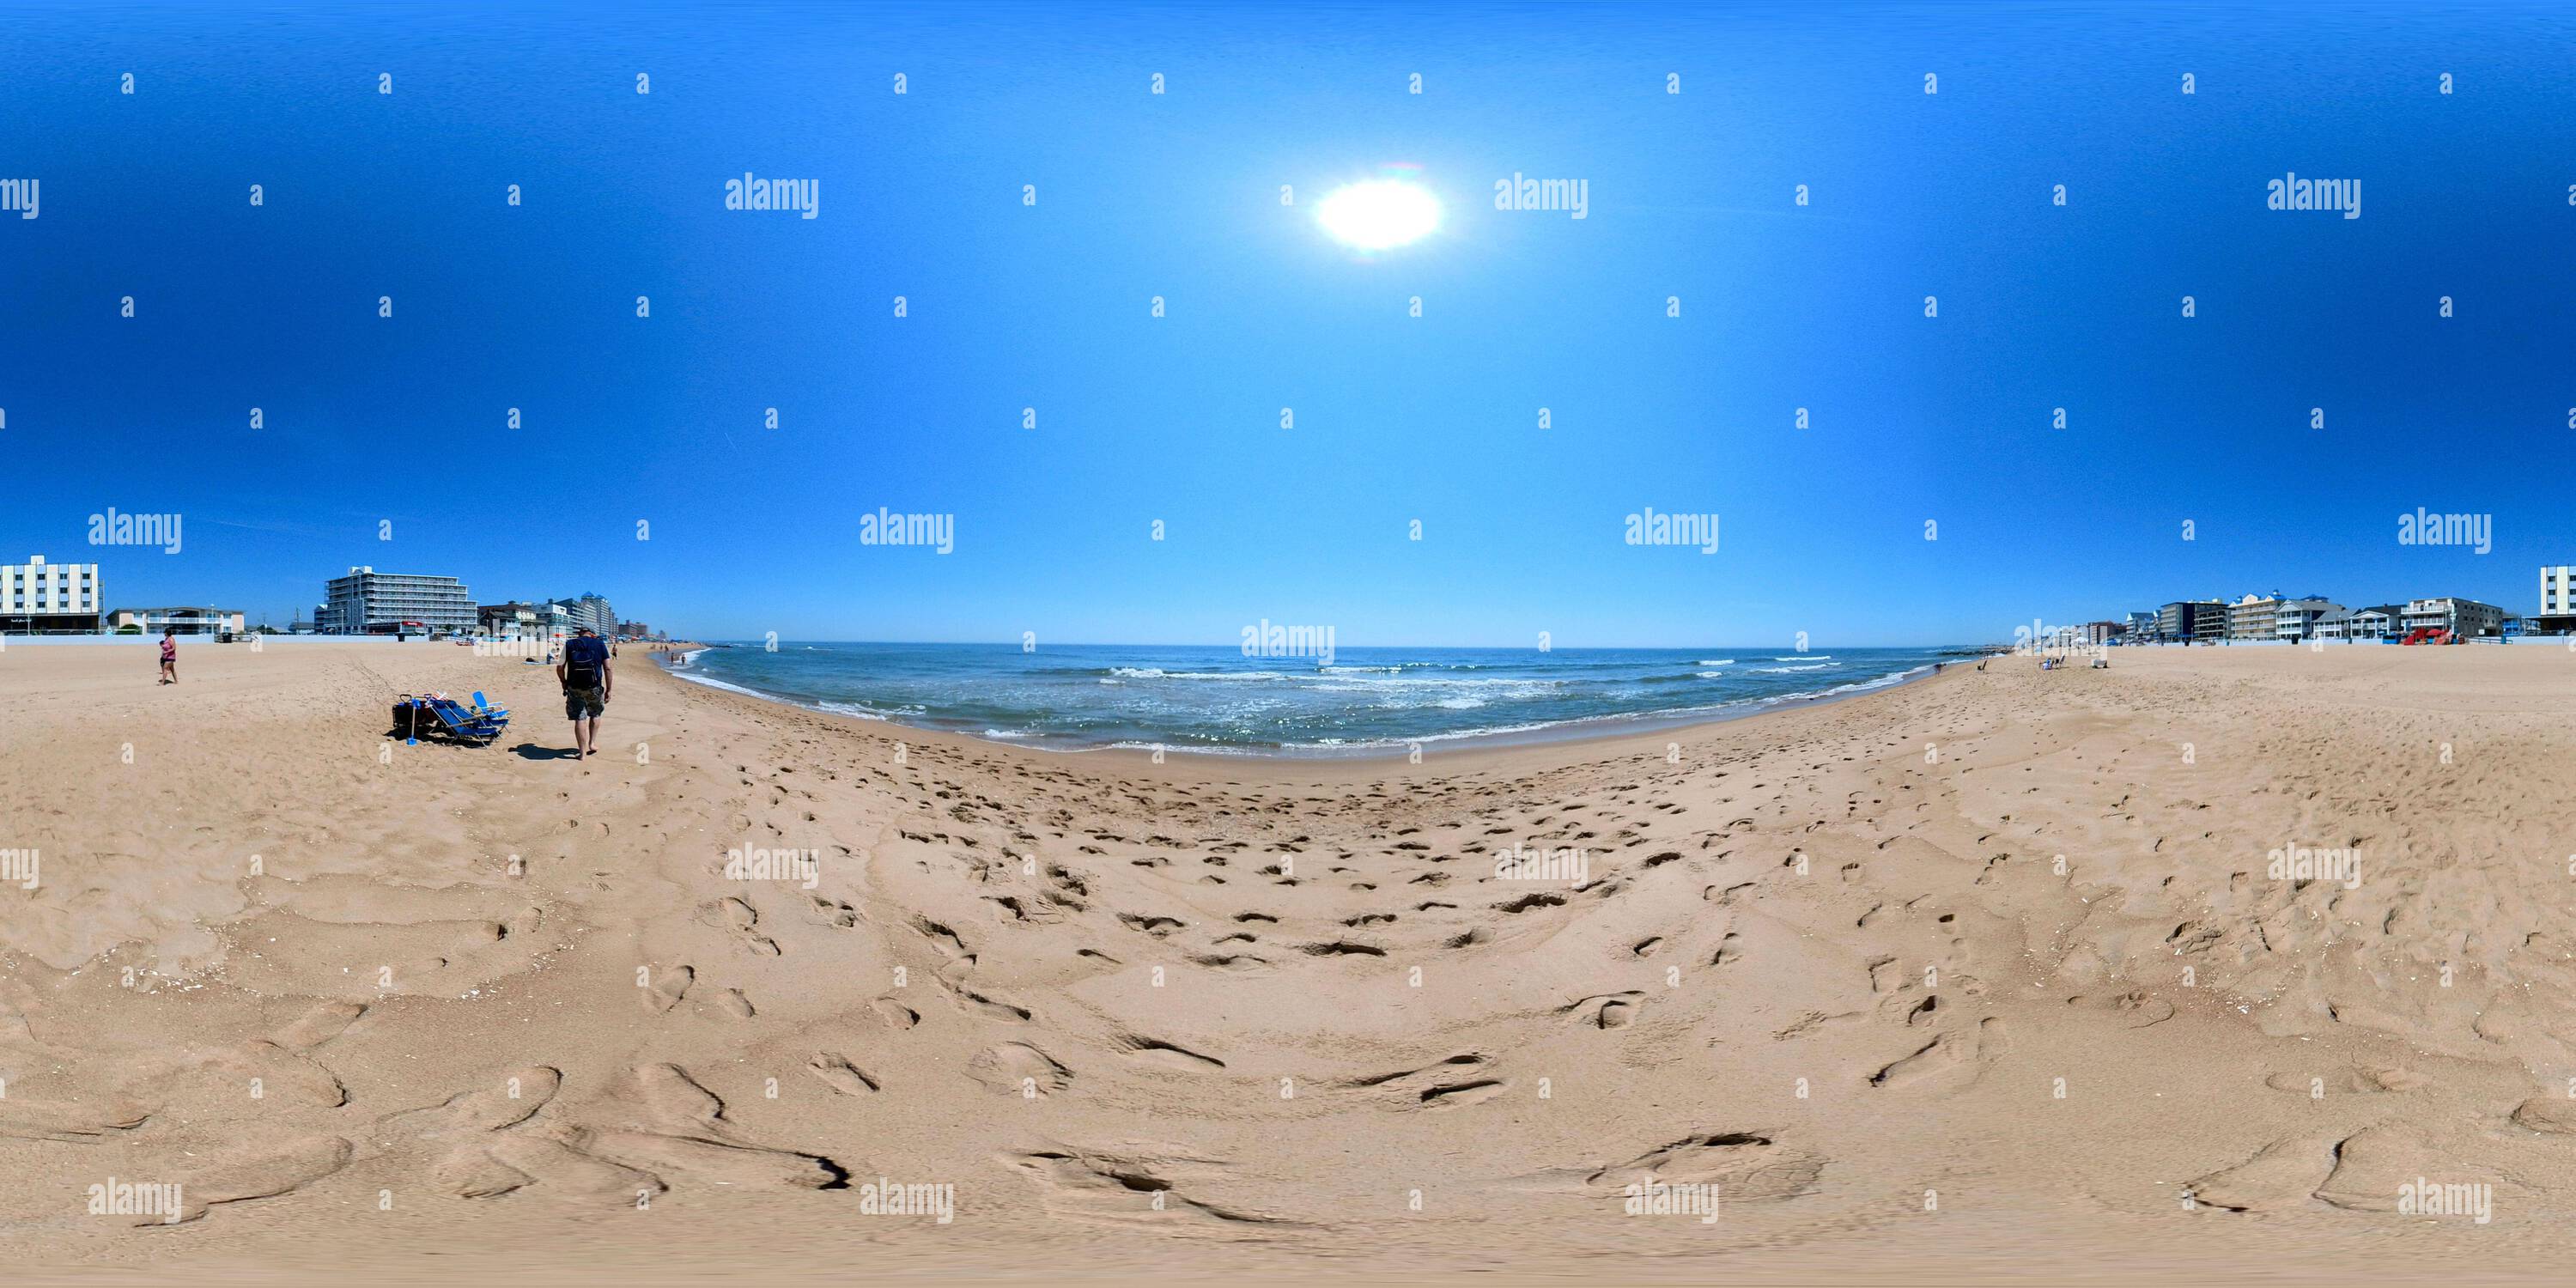 360 degree panoramic view of On the beach in Ocean City, Maryland near 15th Street